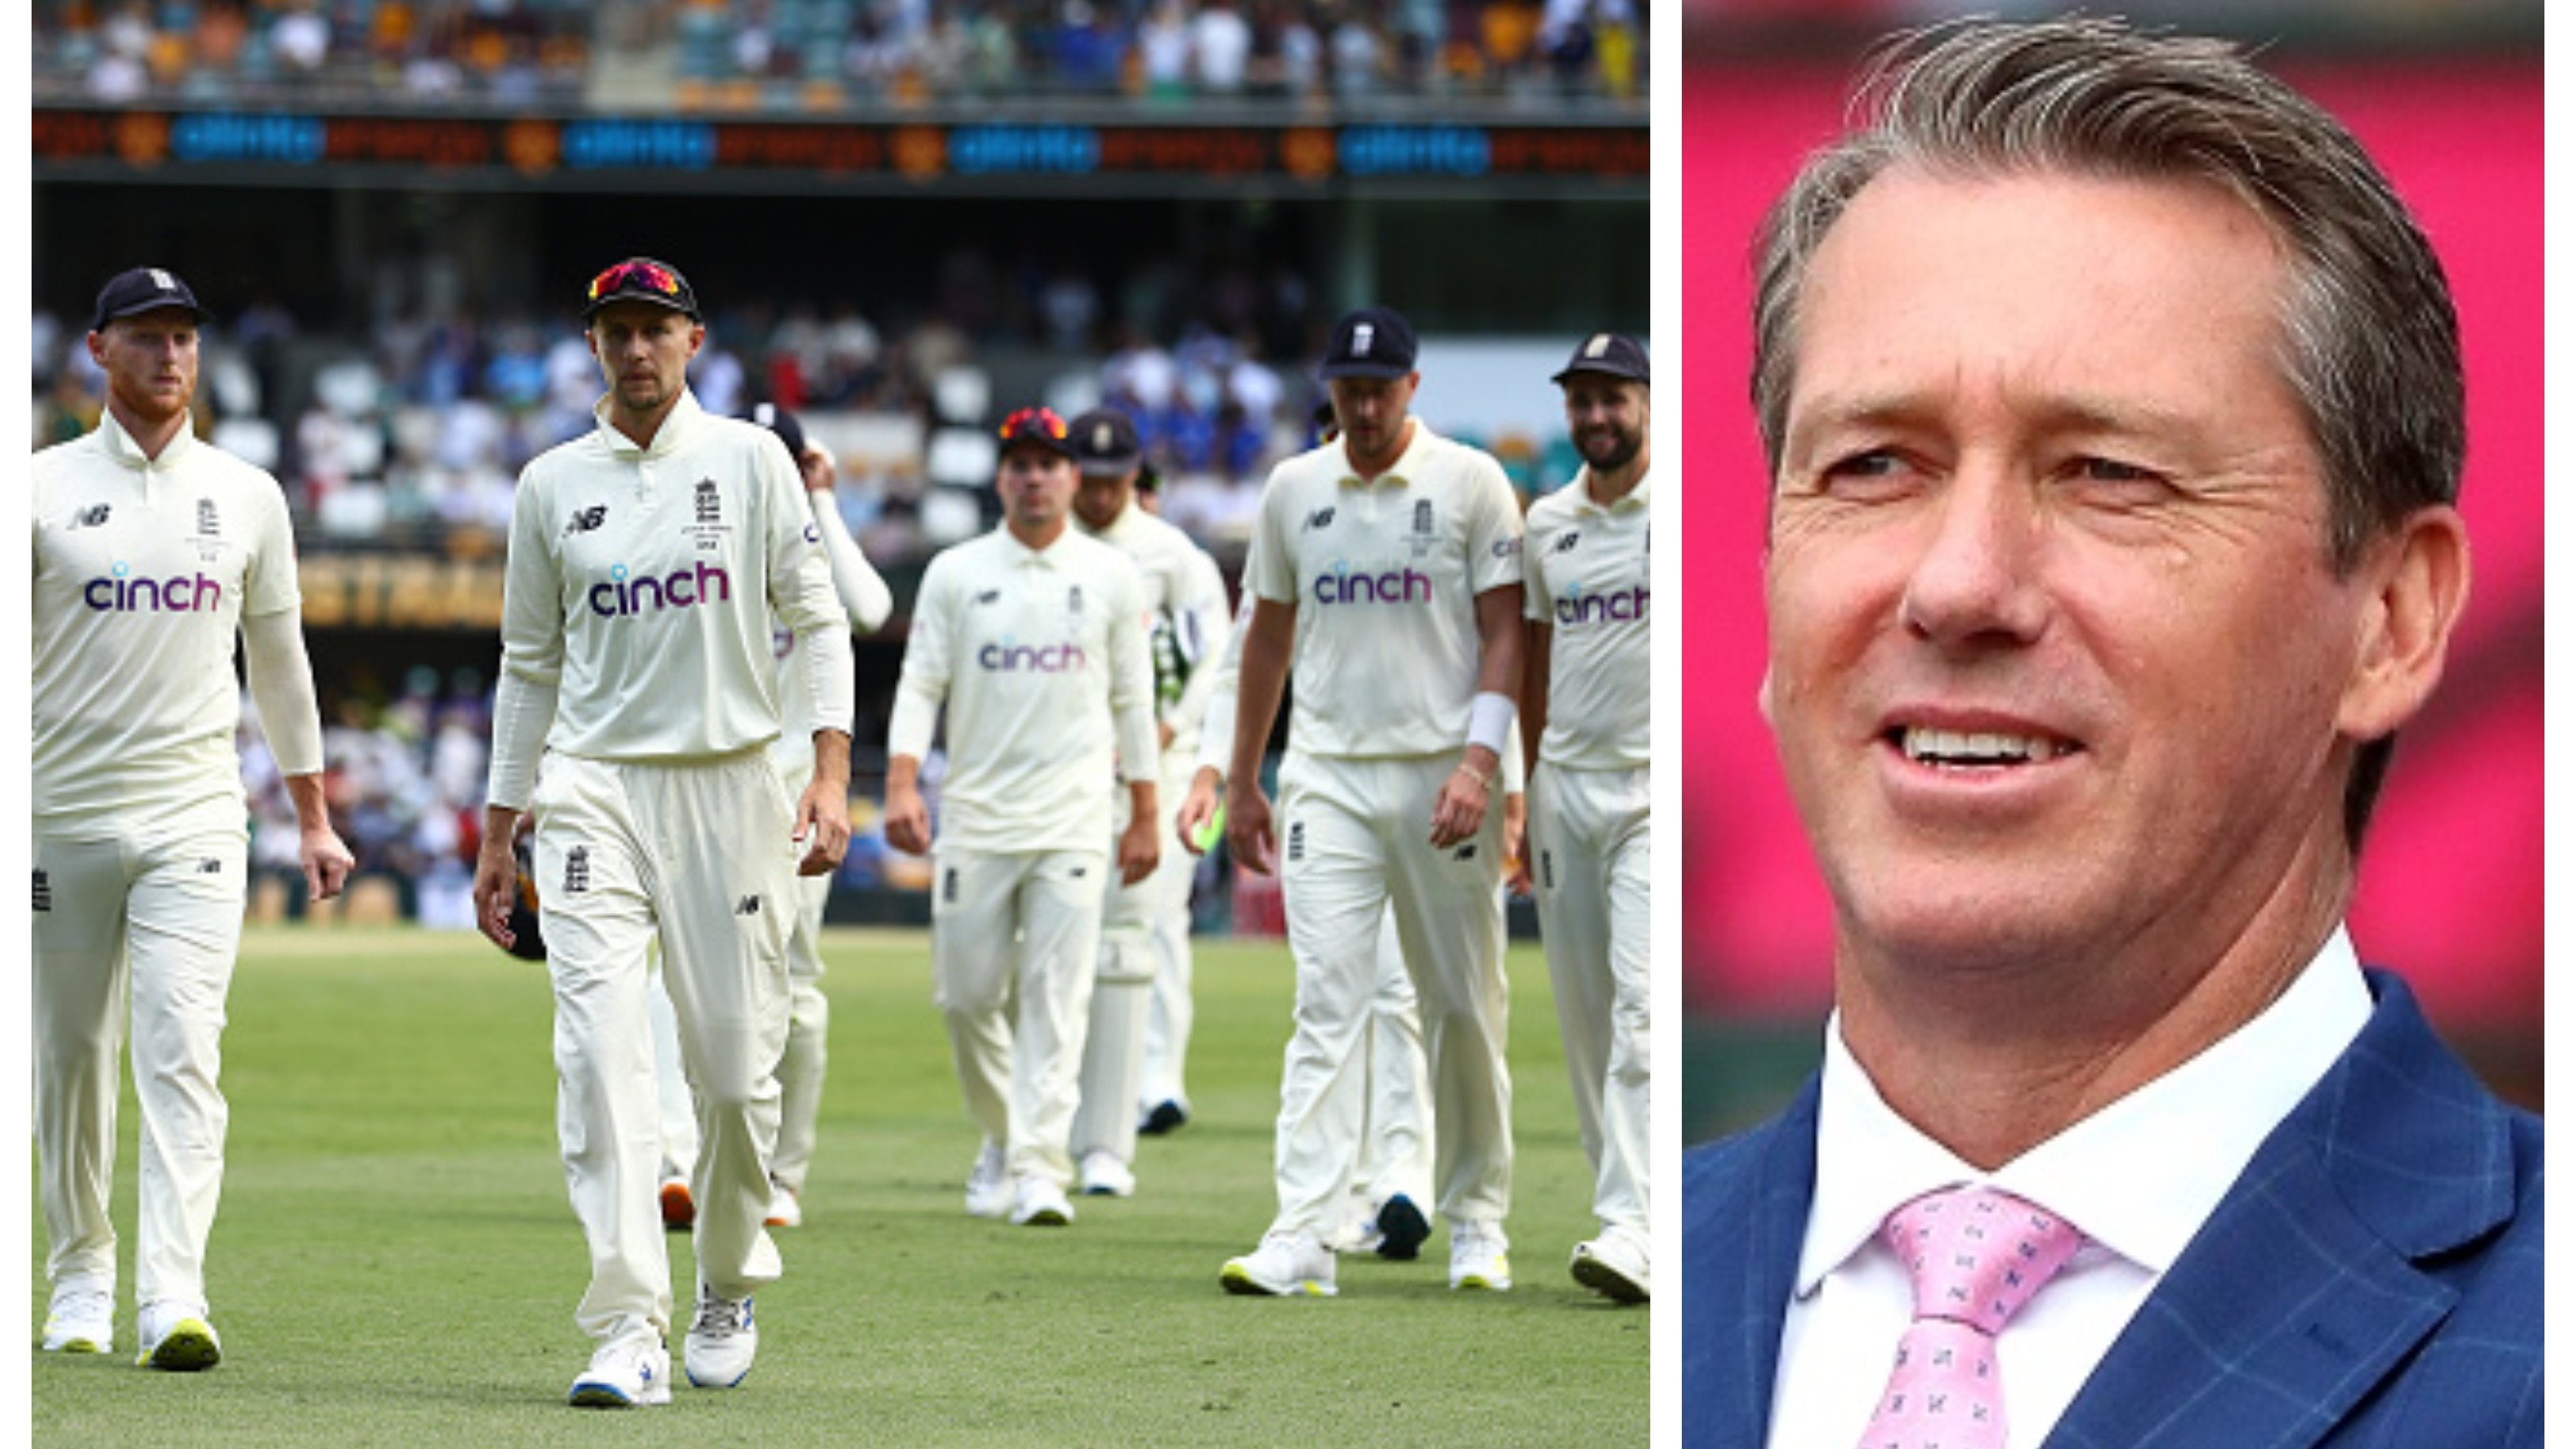 Ashes 2021-22: ‘There’s a lot of political correctness’, McGrath disappointed with England’s lack of aggression